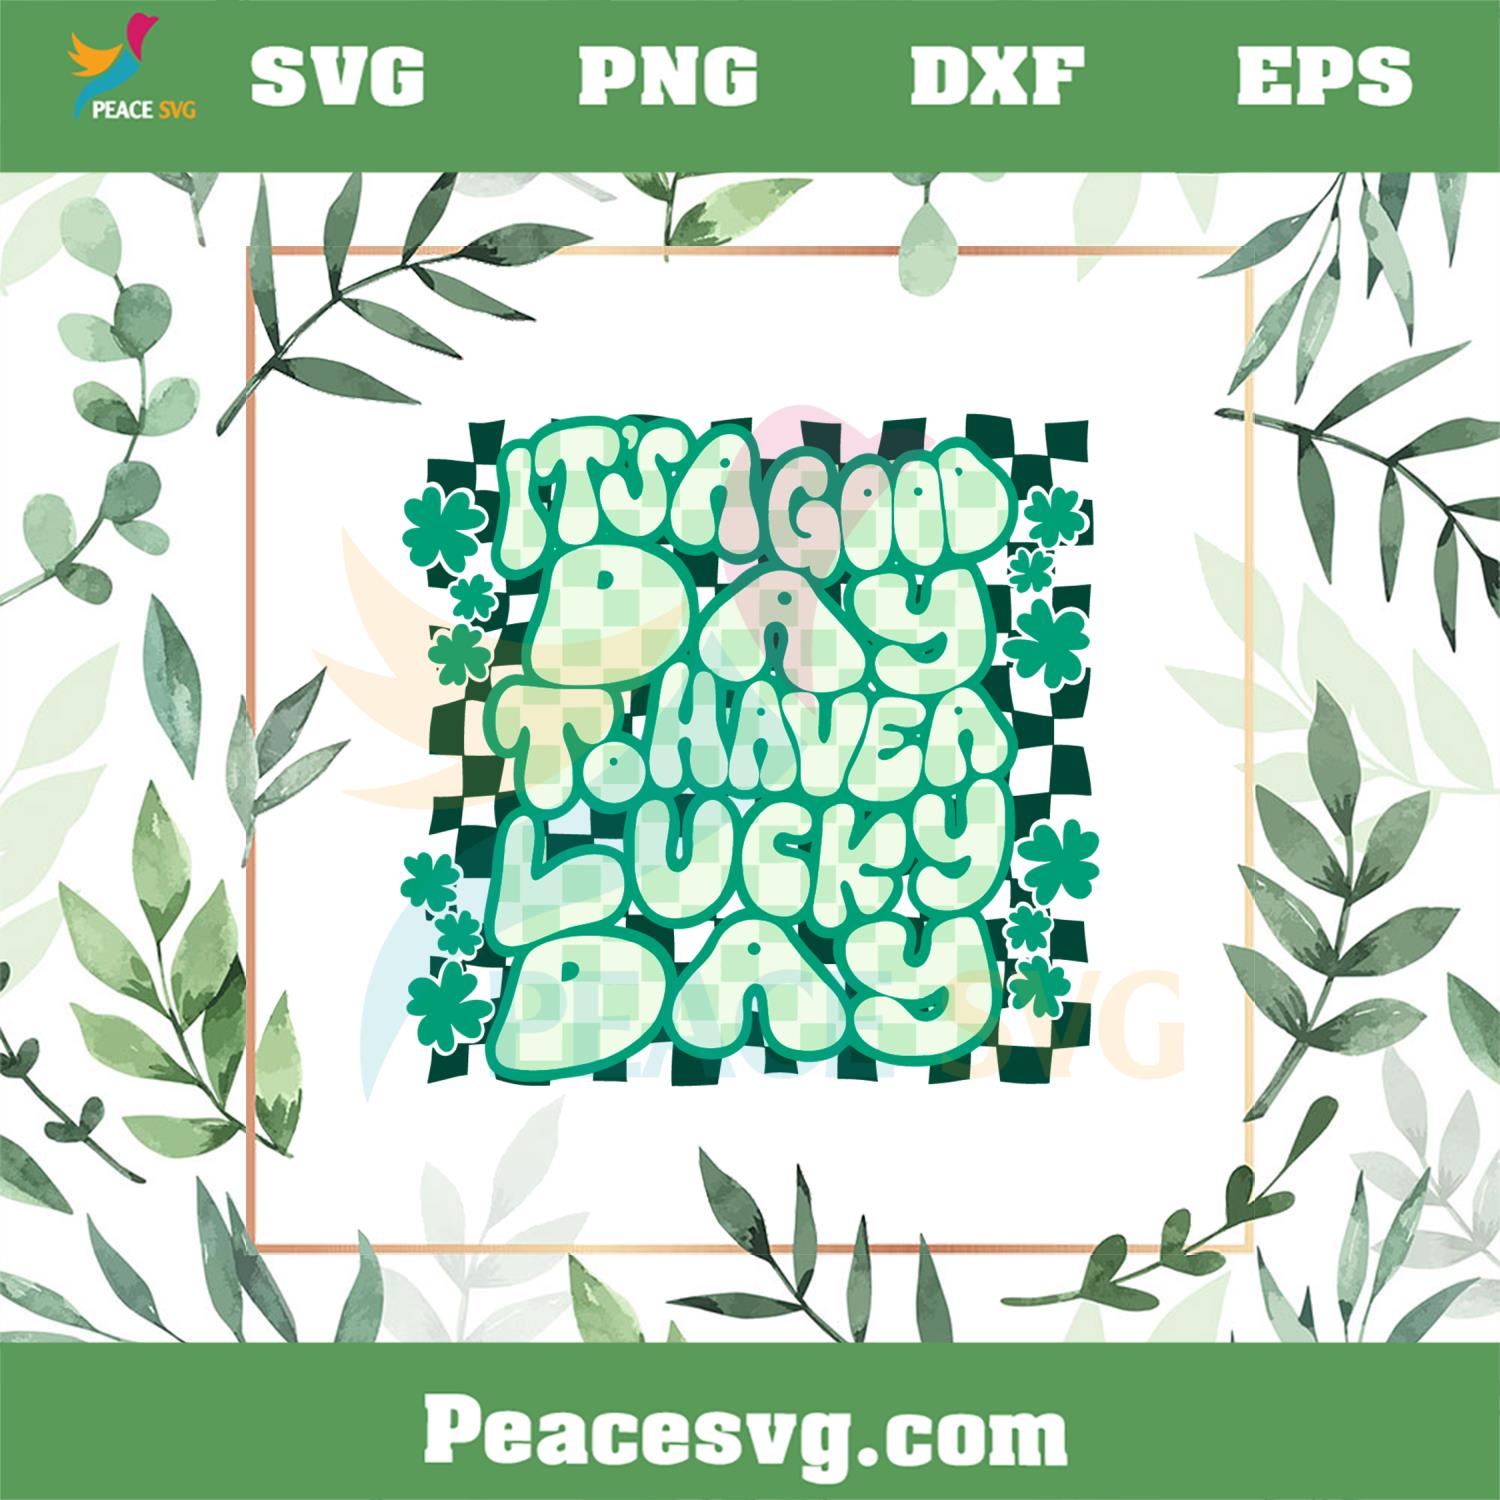 It’s A Good Day To Have A Lucky Day Shamrock SVG Cutting Files